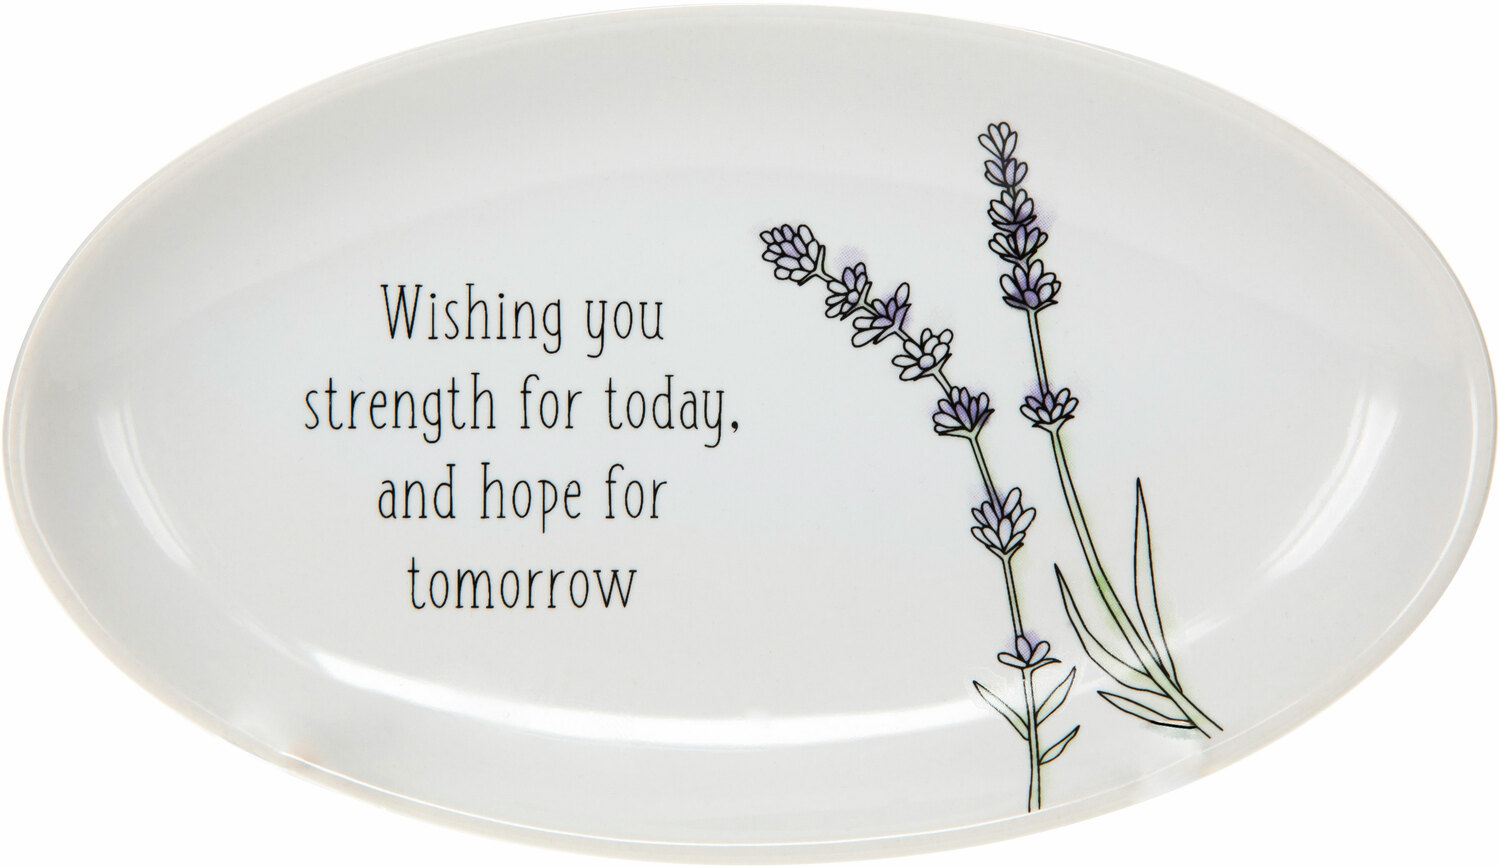 Strength for Today by Faith Hope and Healing - Strength for Today - 5.5" x 3.25" Keepsake Dish